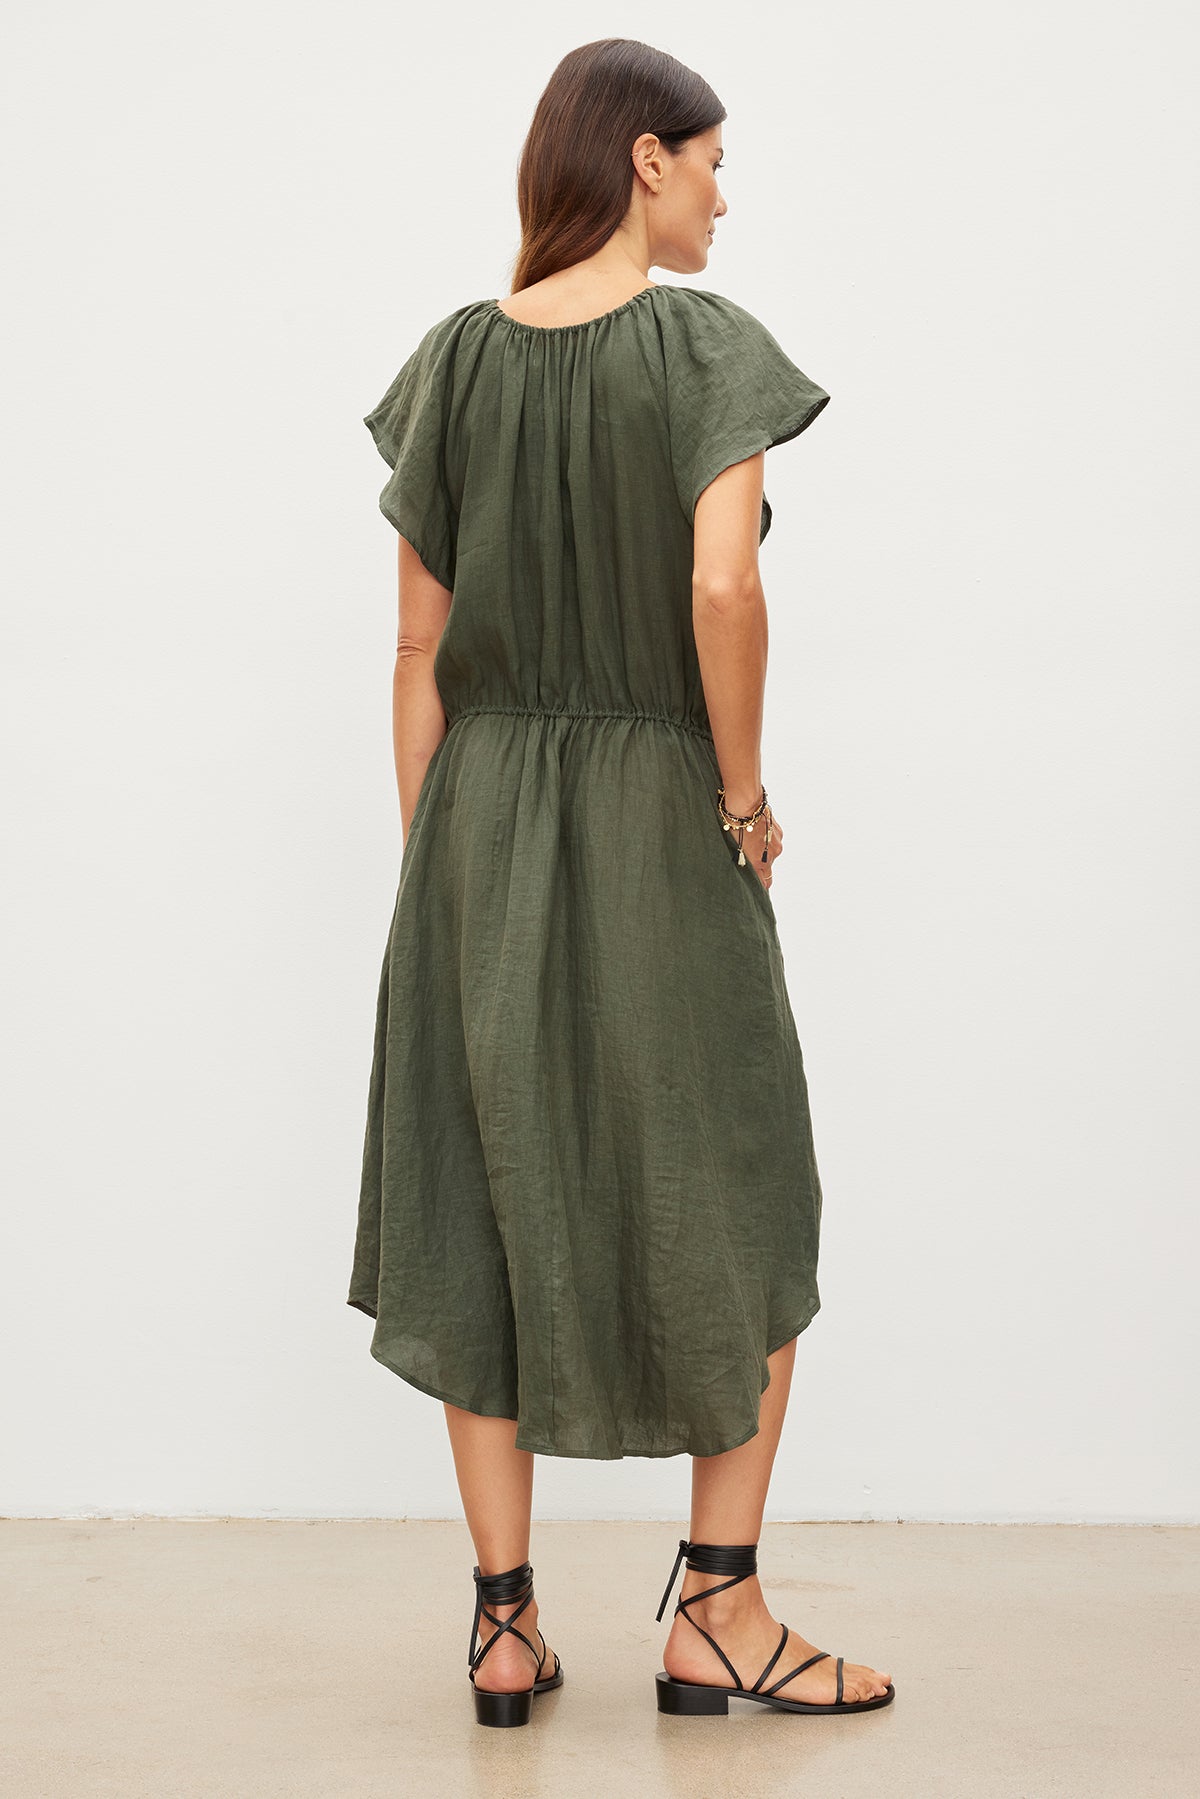 A woman stands facing away from the camera, wearing a green woven Pepper Linen V-Neck Dress with ruffled sleeves and black sandals by Velvet by Graham & Spencer.-35967692177601